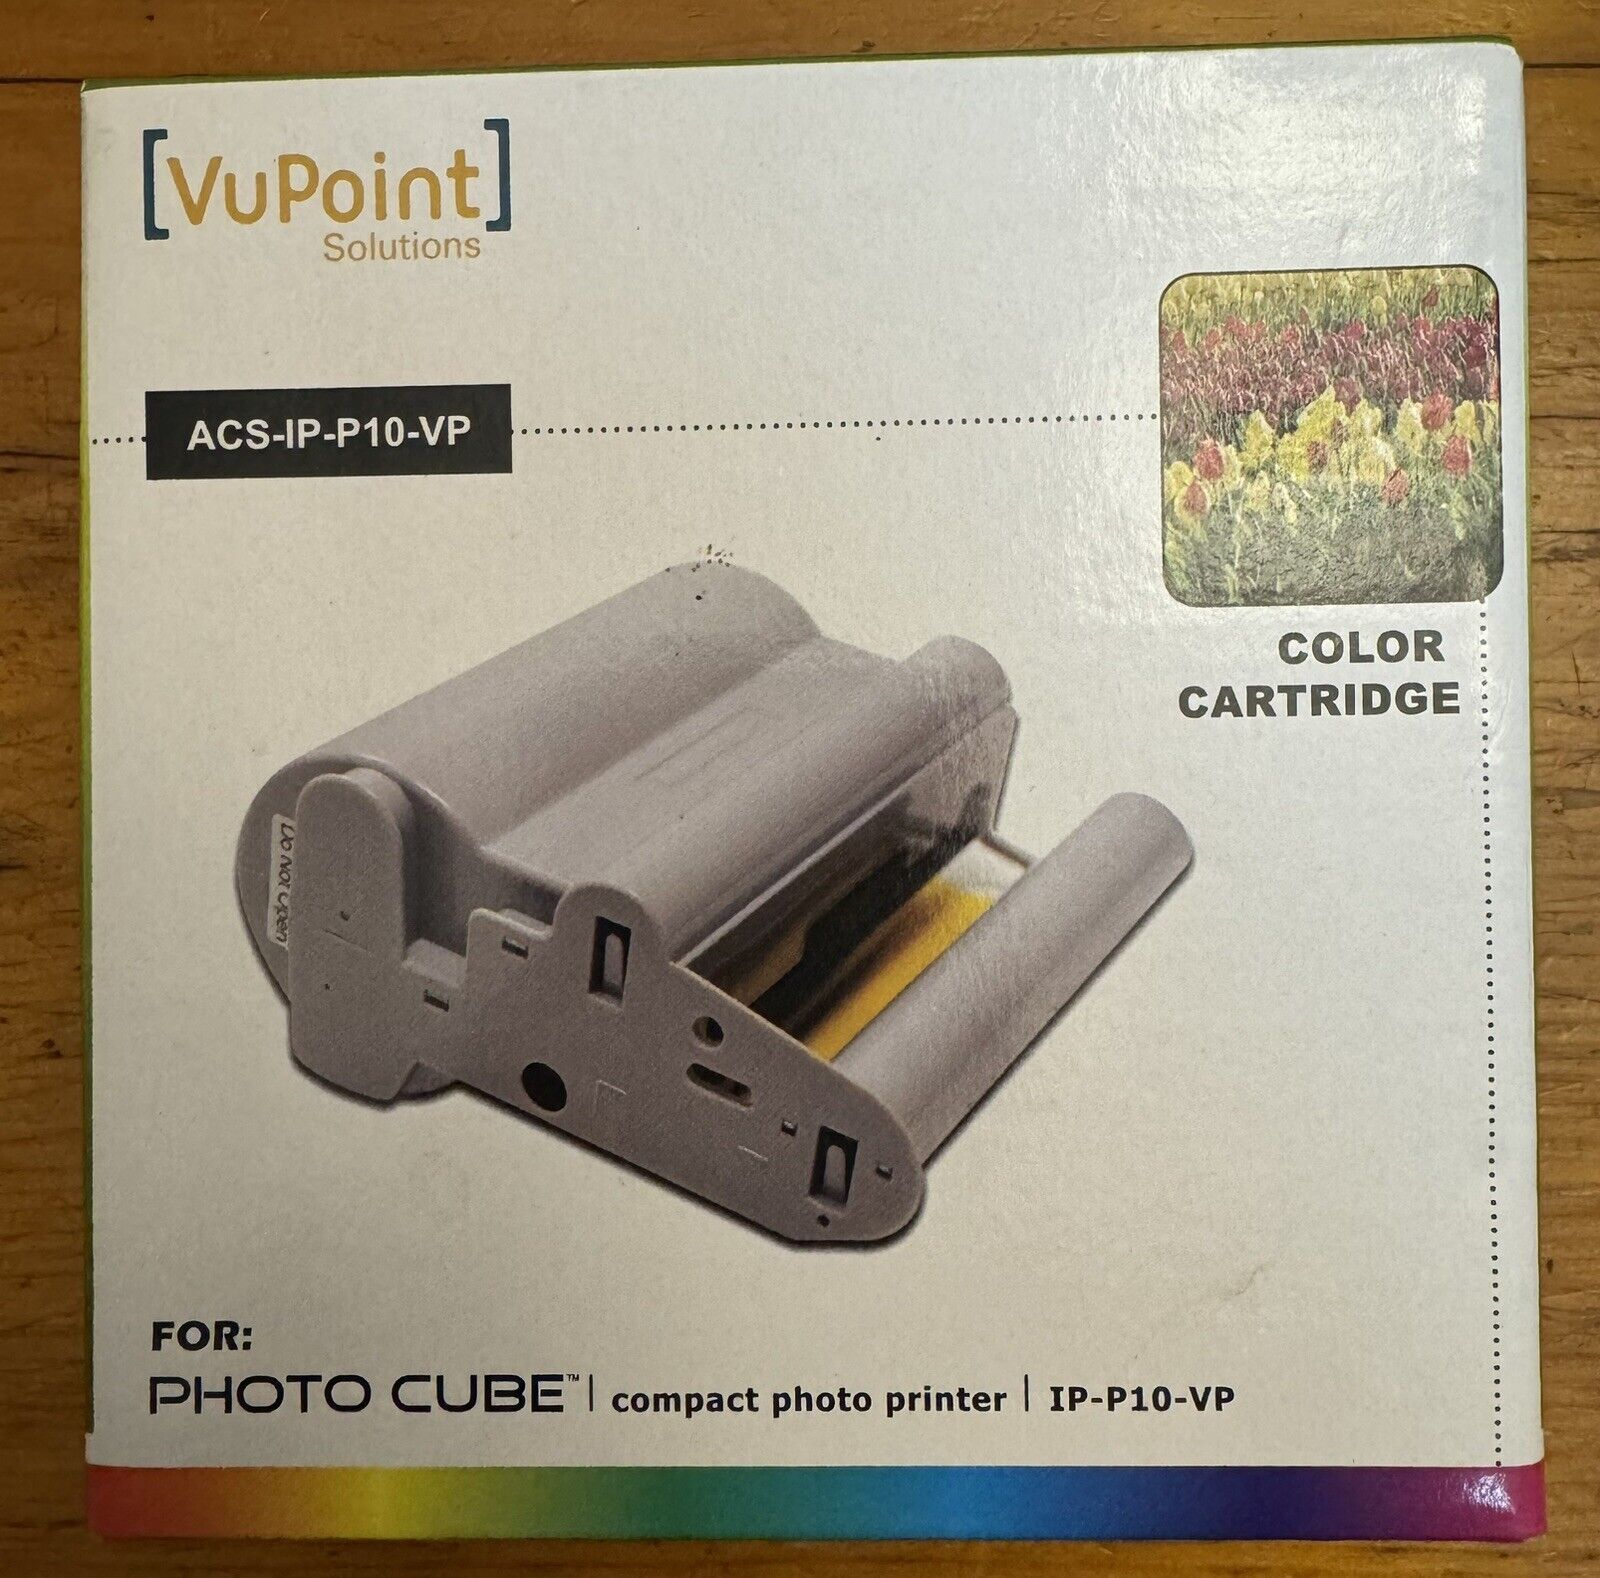 VuPoint Color Cartridge All in One Photo & Ink Cartridge Photo Cube IP-P10-VP